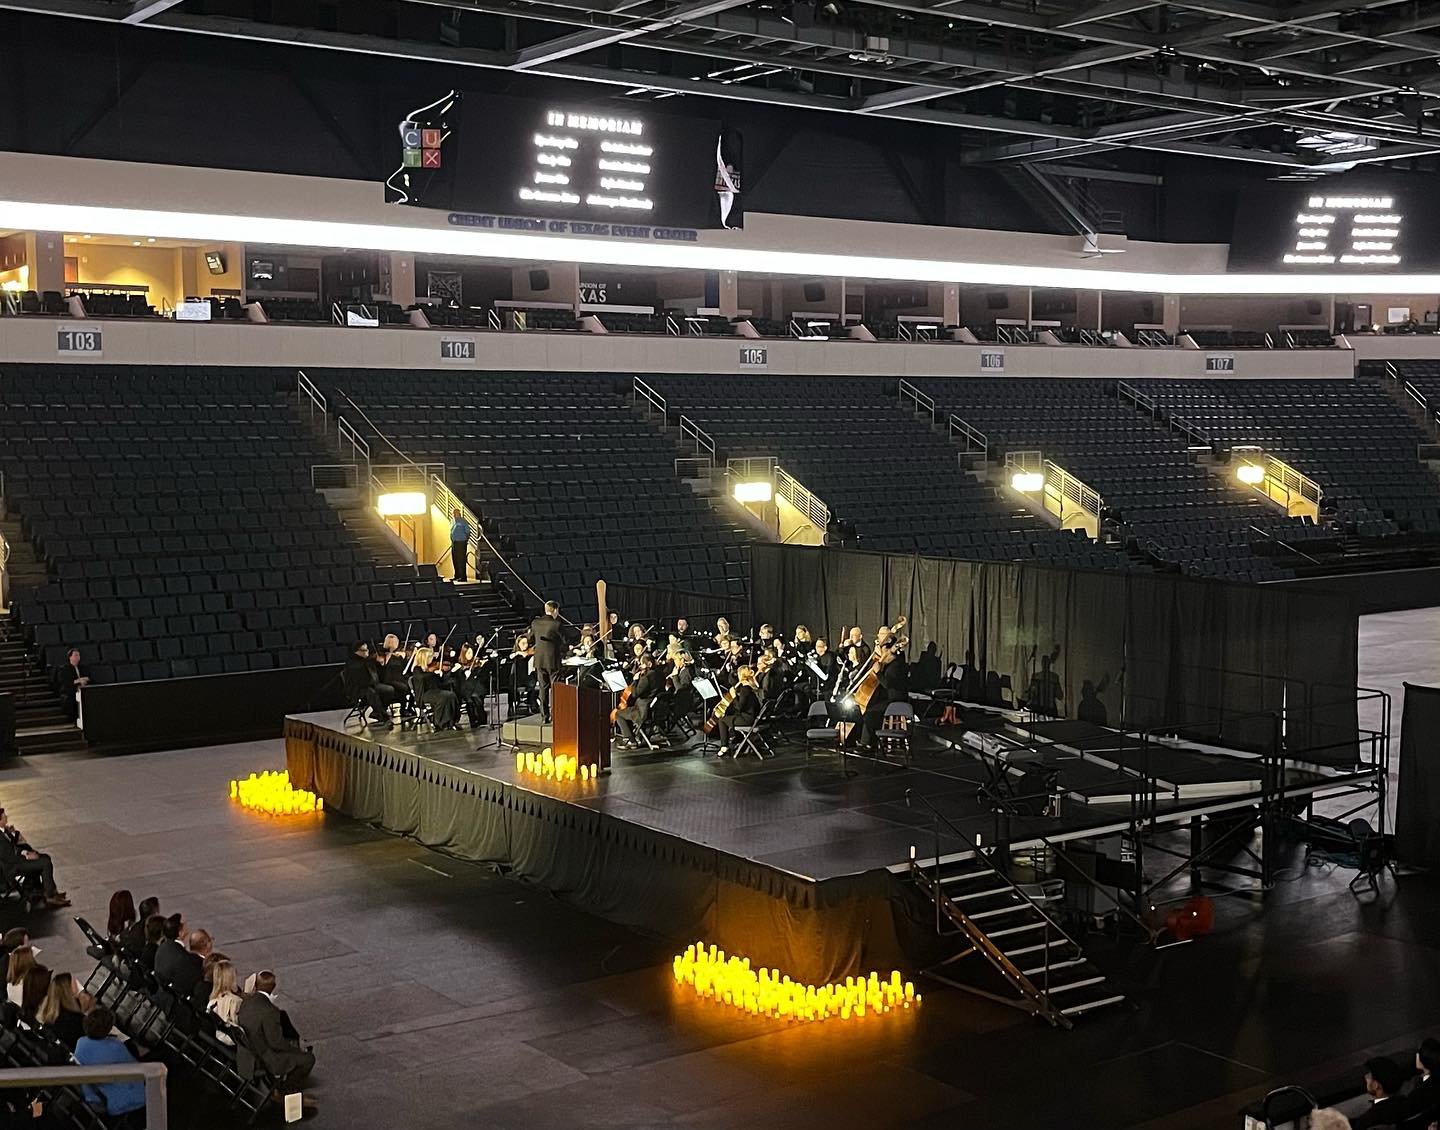 Beautiful service in Allen today to honor the victims, survivors, families and first responders of the Allen shooting that happened a year ago today.